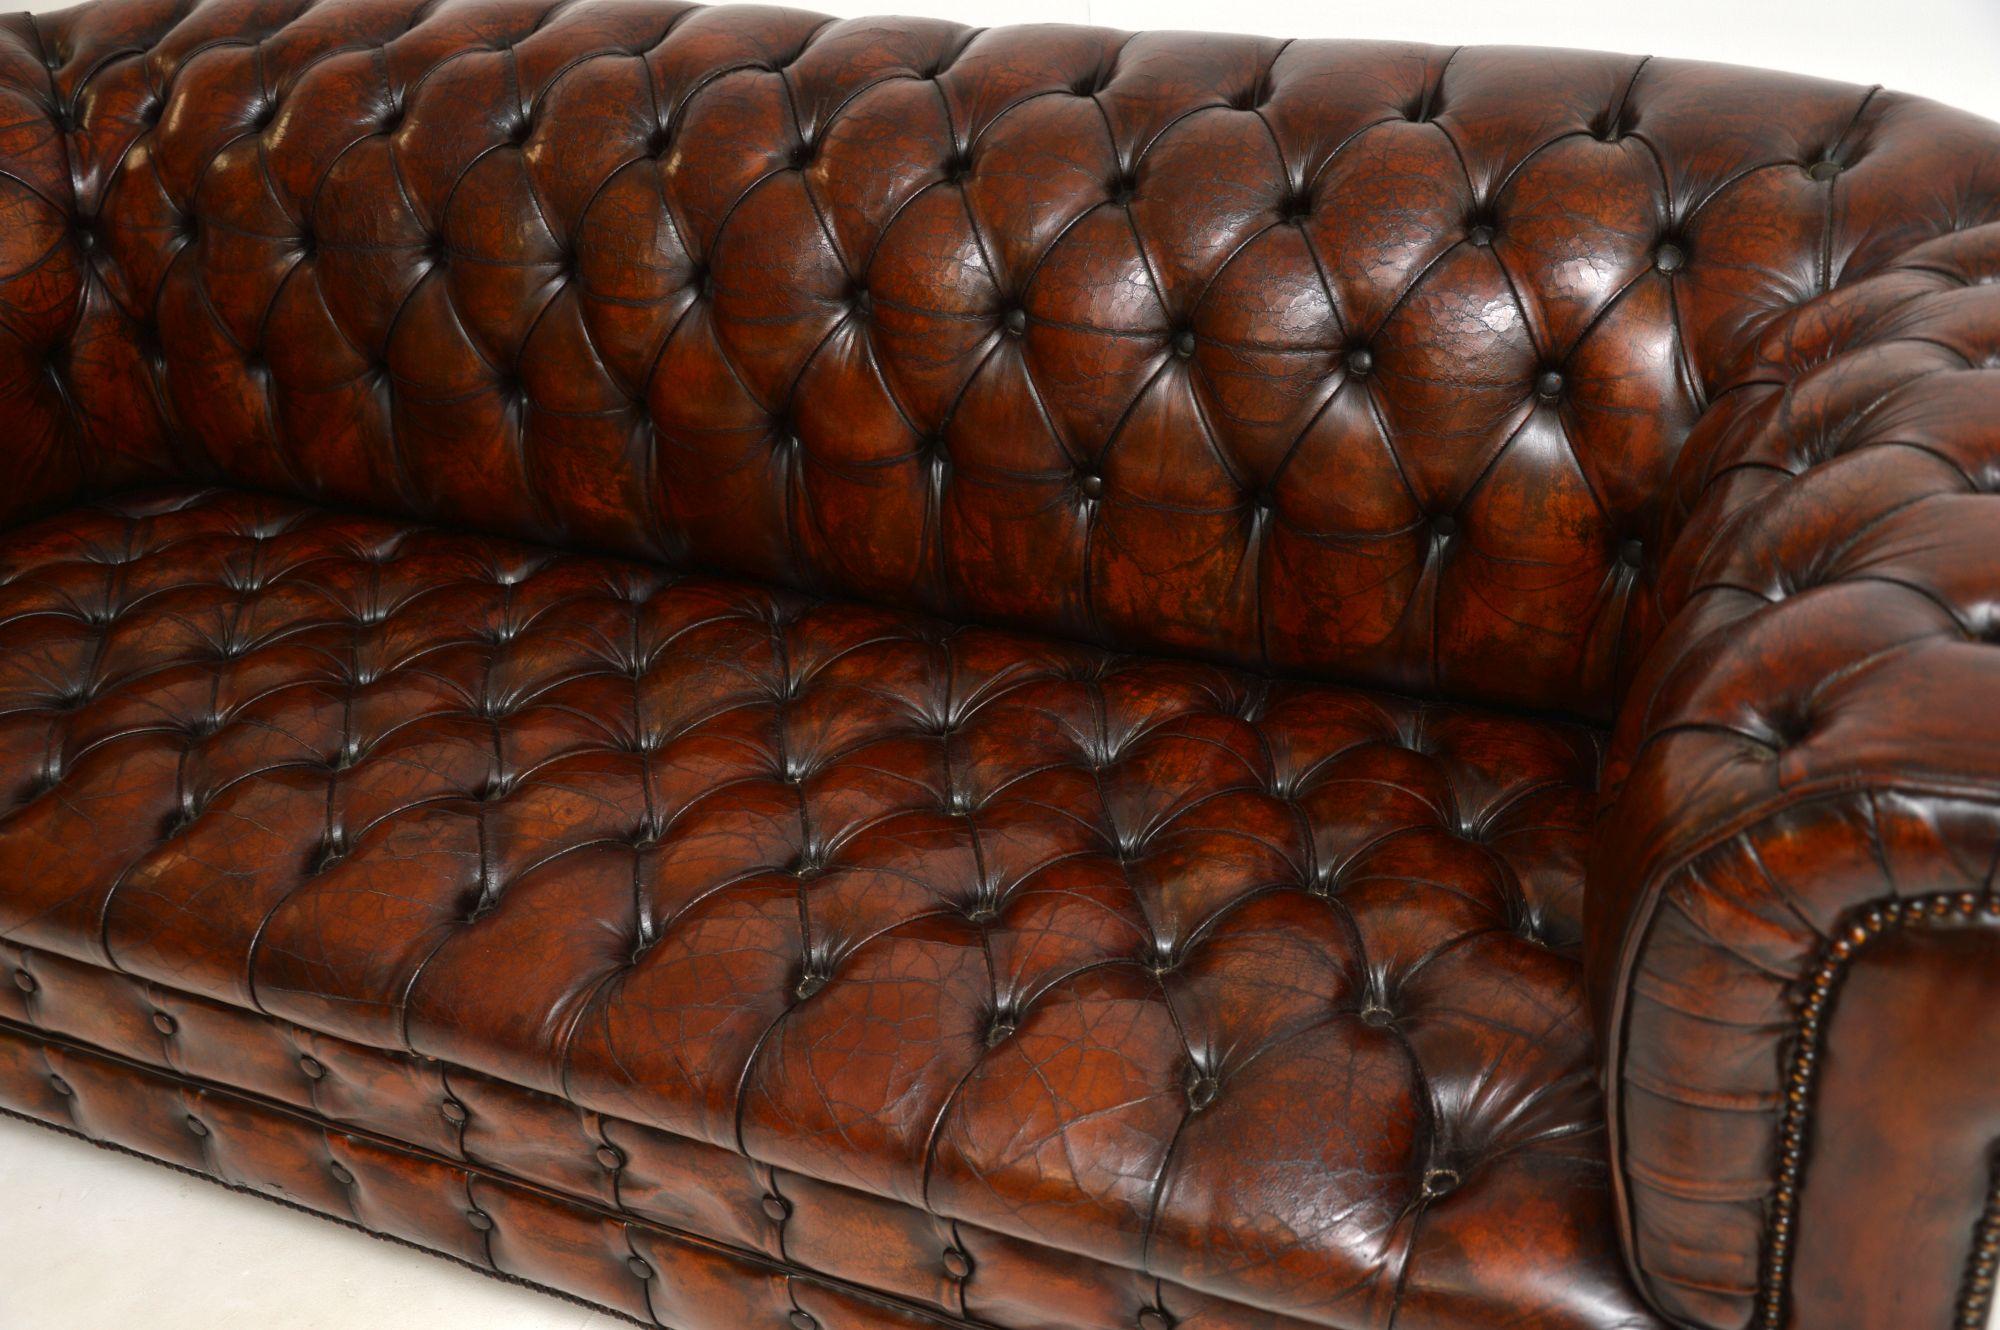 Antique Deep Buttoned Leather Chesterfield Sofa 5